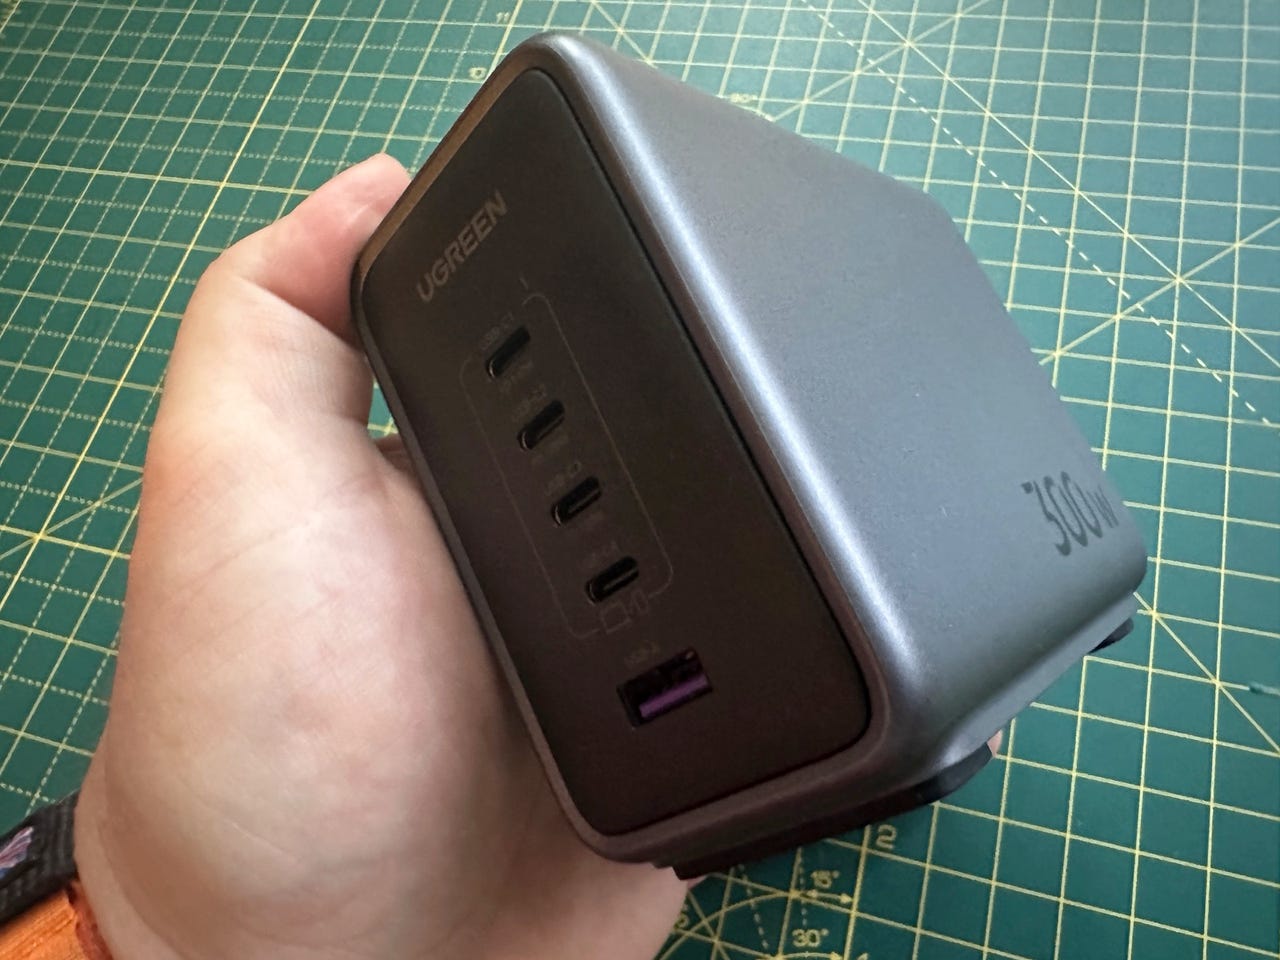 This beast of a USB-C charger can power 3 laptops, and it's $70